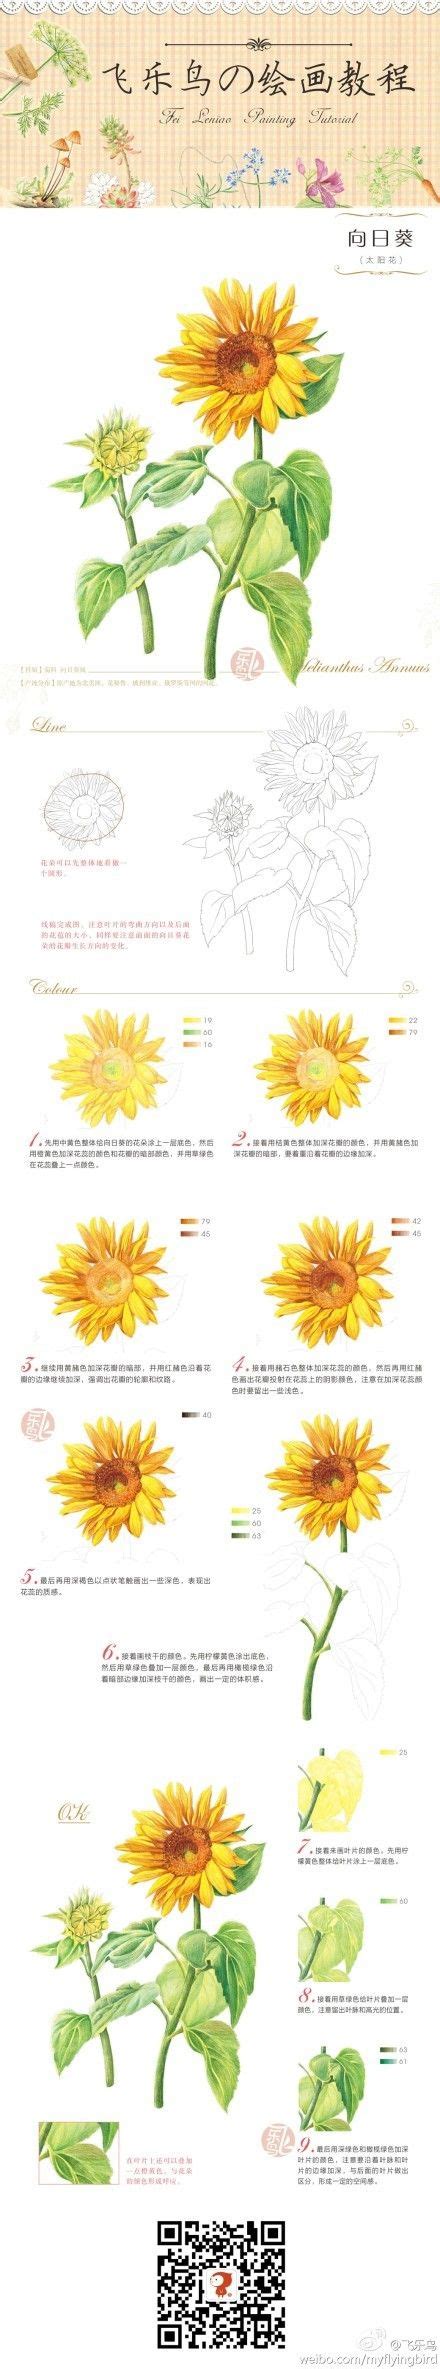 Learn the basics of pencil techniques, that will pencil drawing is the most basic way to start drawing, and is the perfect gateway for pen and ink, painting and more. step by step colored pencil drawing of a sunflower | 색연필 ...